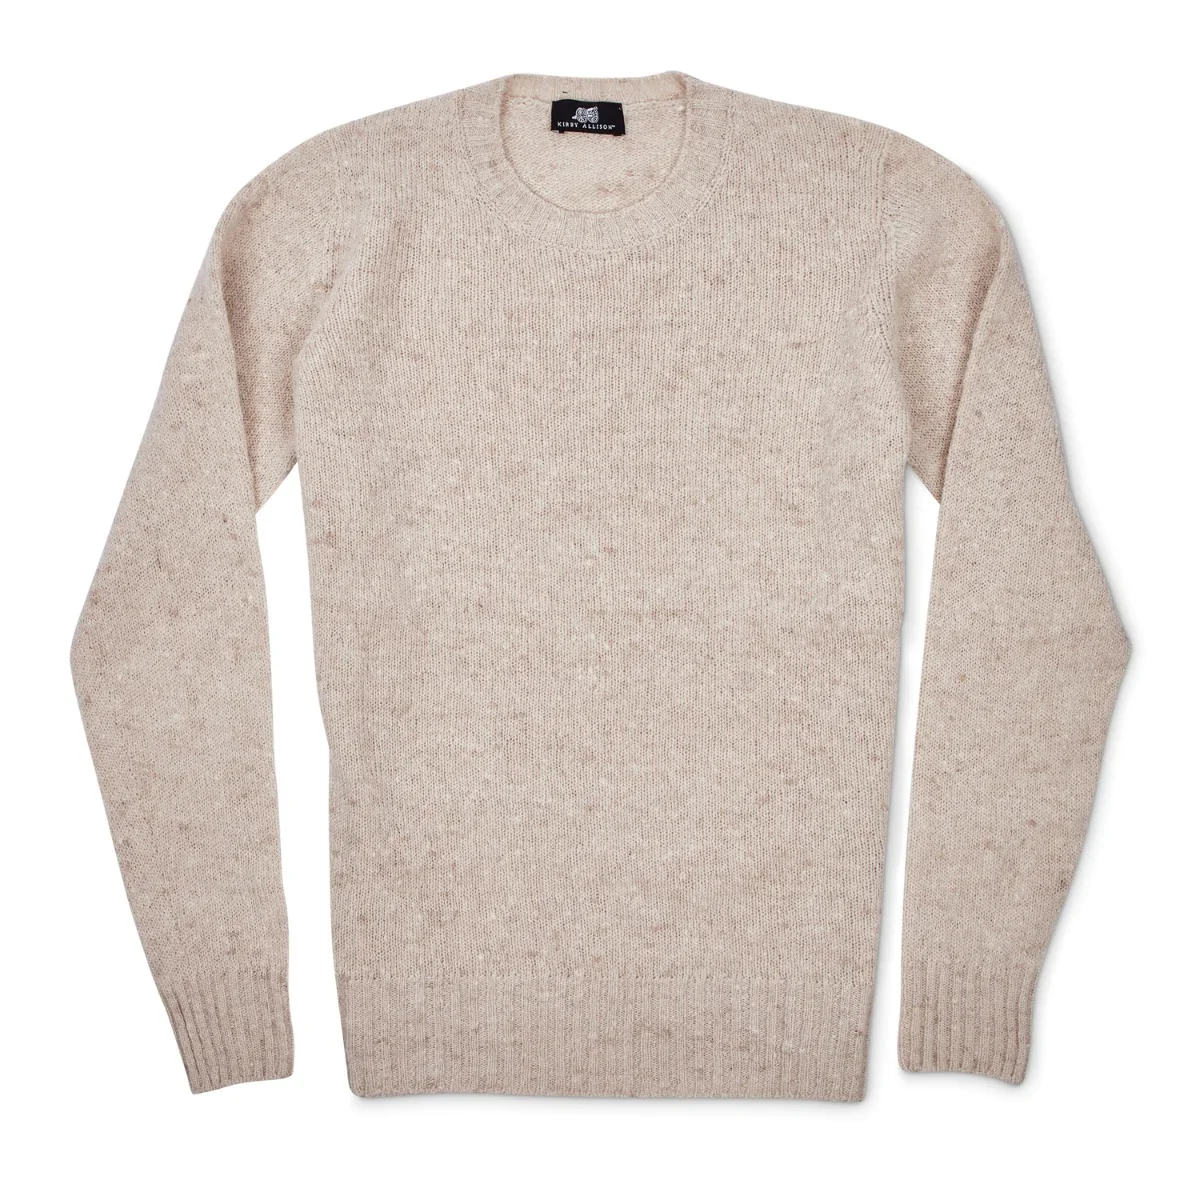 Image of Sovereign Grade Oatmeal Donegal Crew Neck Sweater